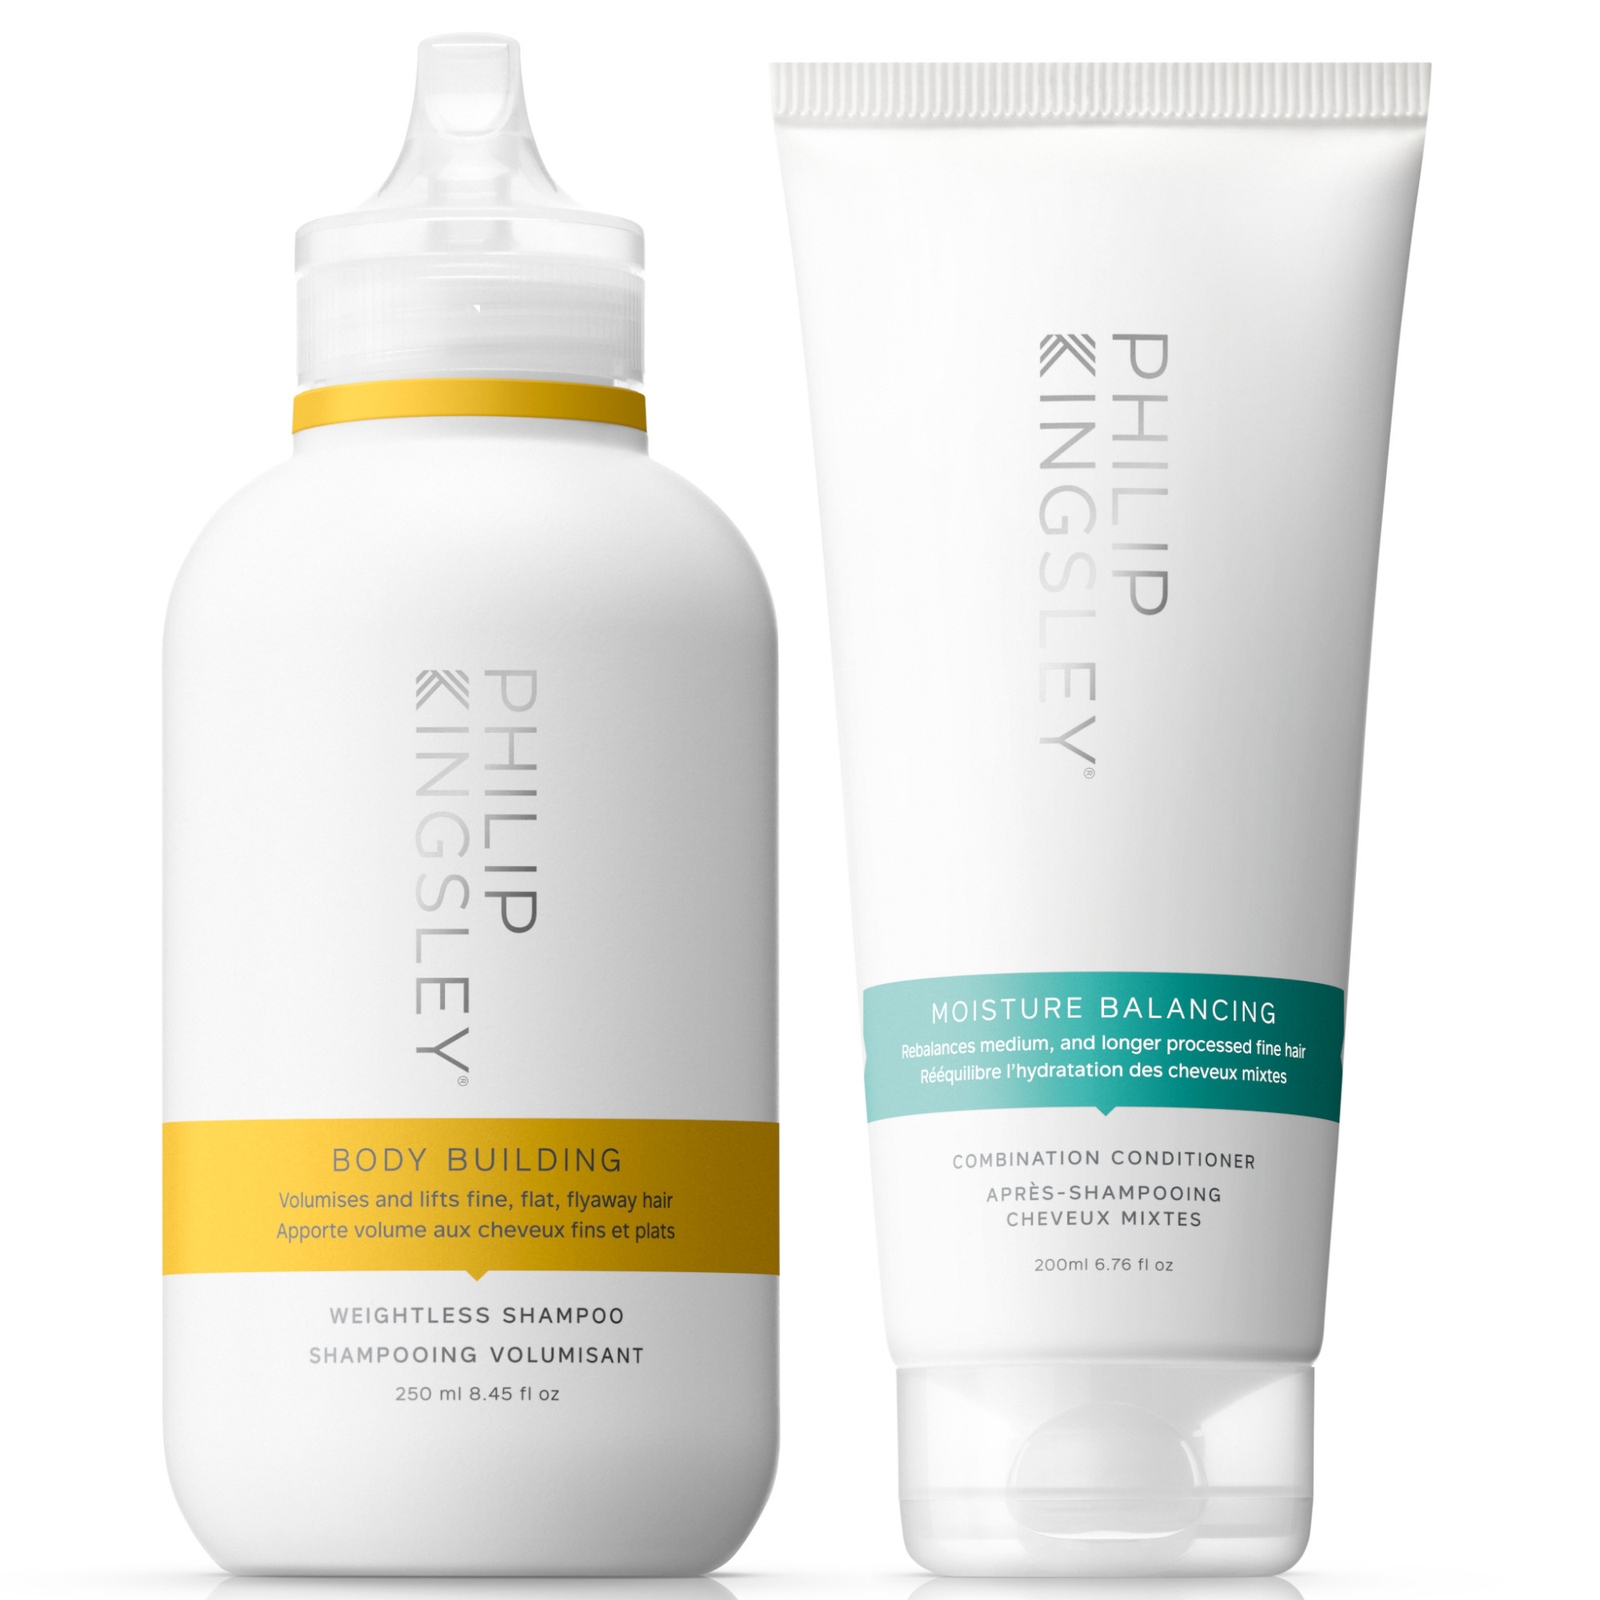 Image of Philip Kingsley Body Building Shampoo 250ml and Moisture Balancing Conditioner 200ml Duo